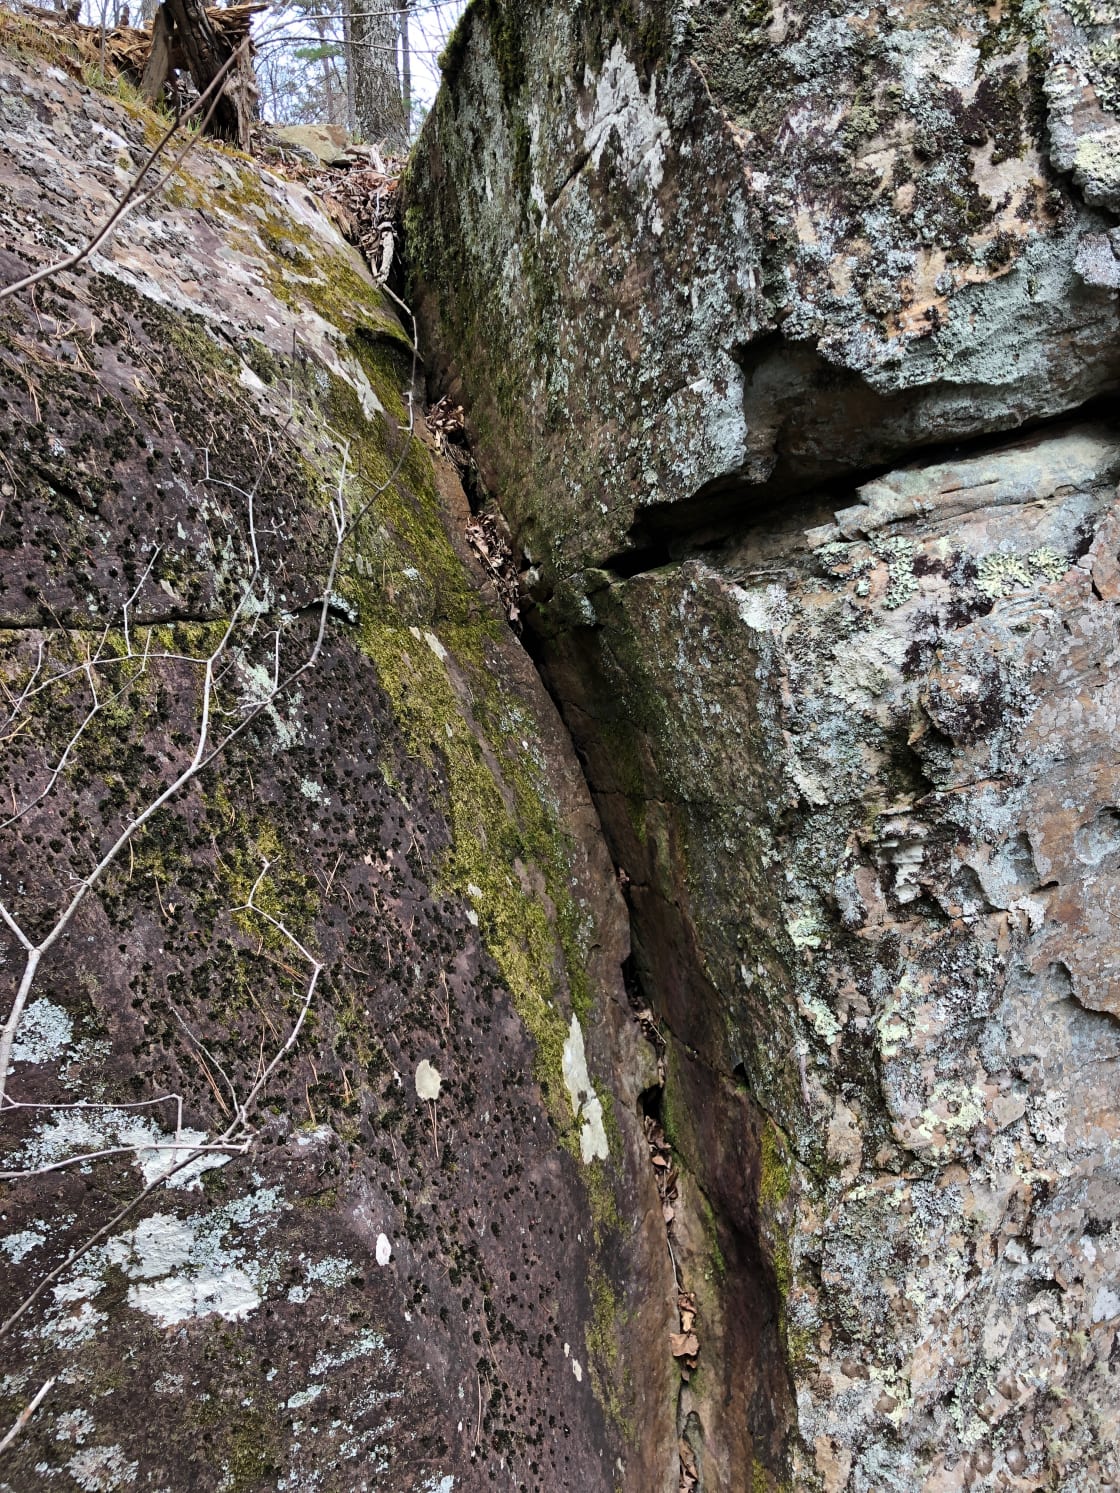 You can hear the water that runs behind this crack in the rock.